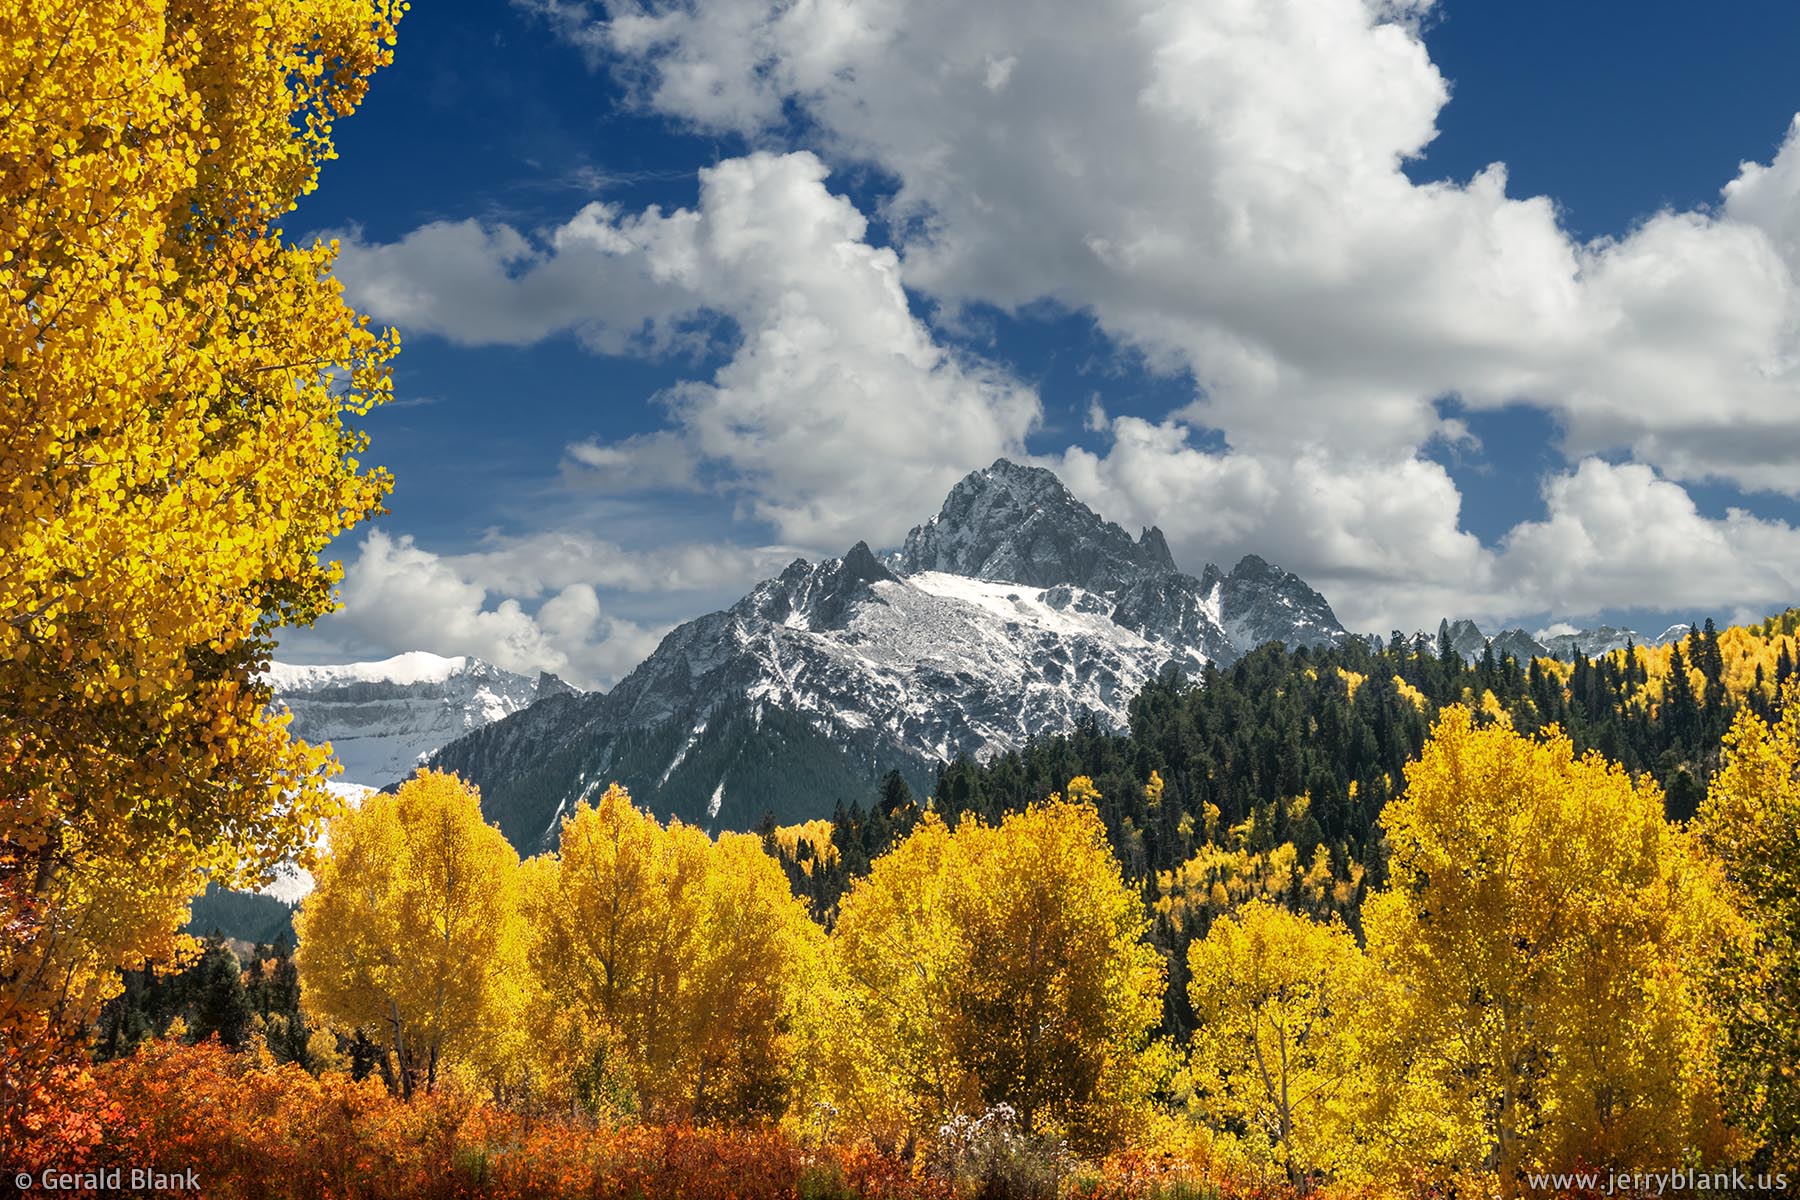 #06814 - Autumn foliage along Ouray County Road 7 frames Mount Sneffels, the highest peak in the Sneffels Range of Colorado’s San Juan Mountains - photo by Jerry Blank